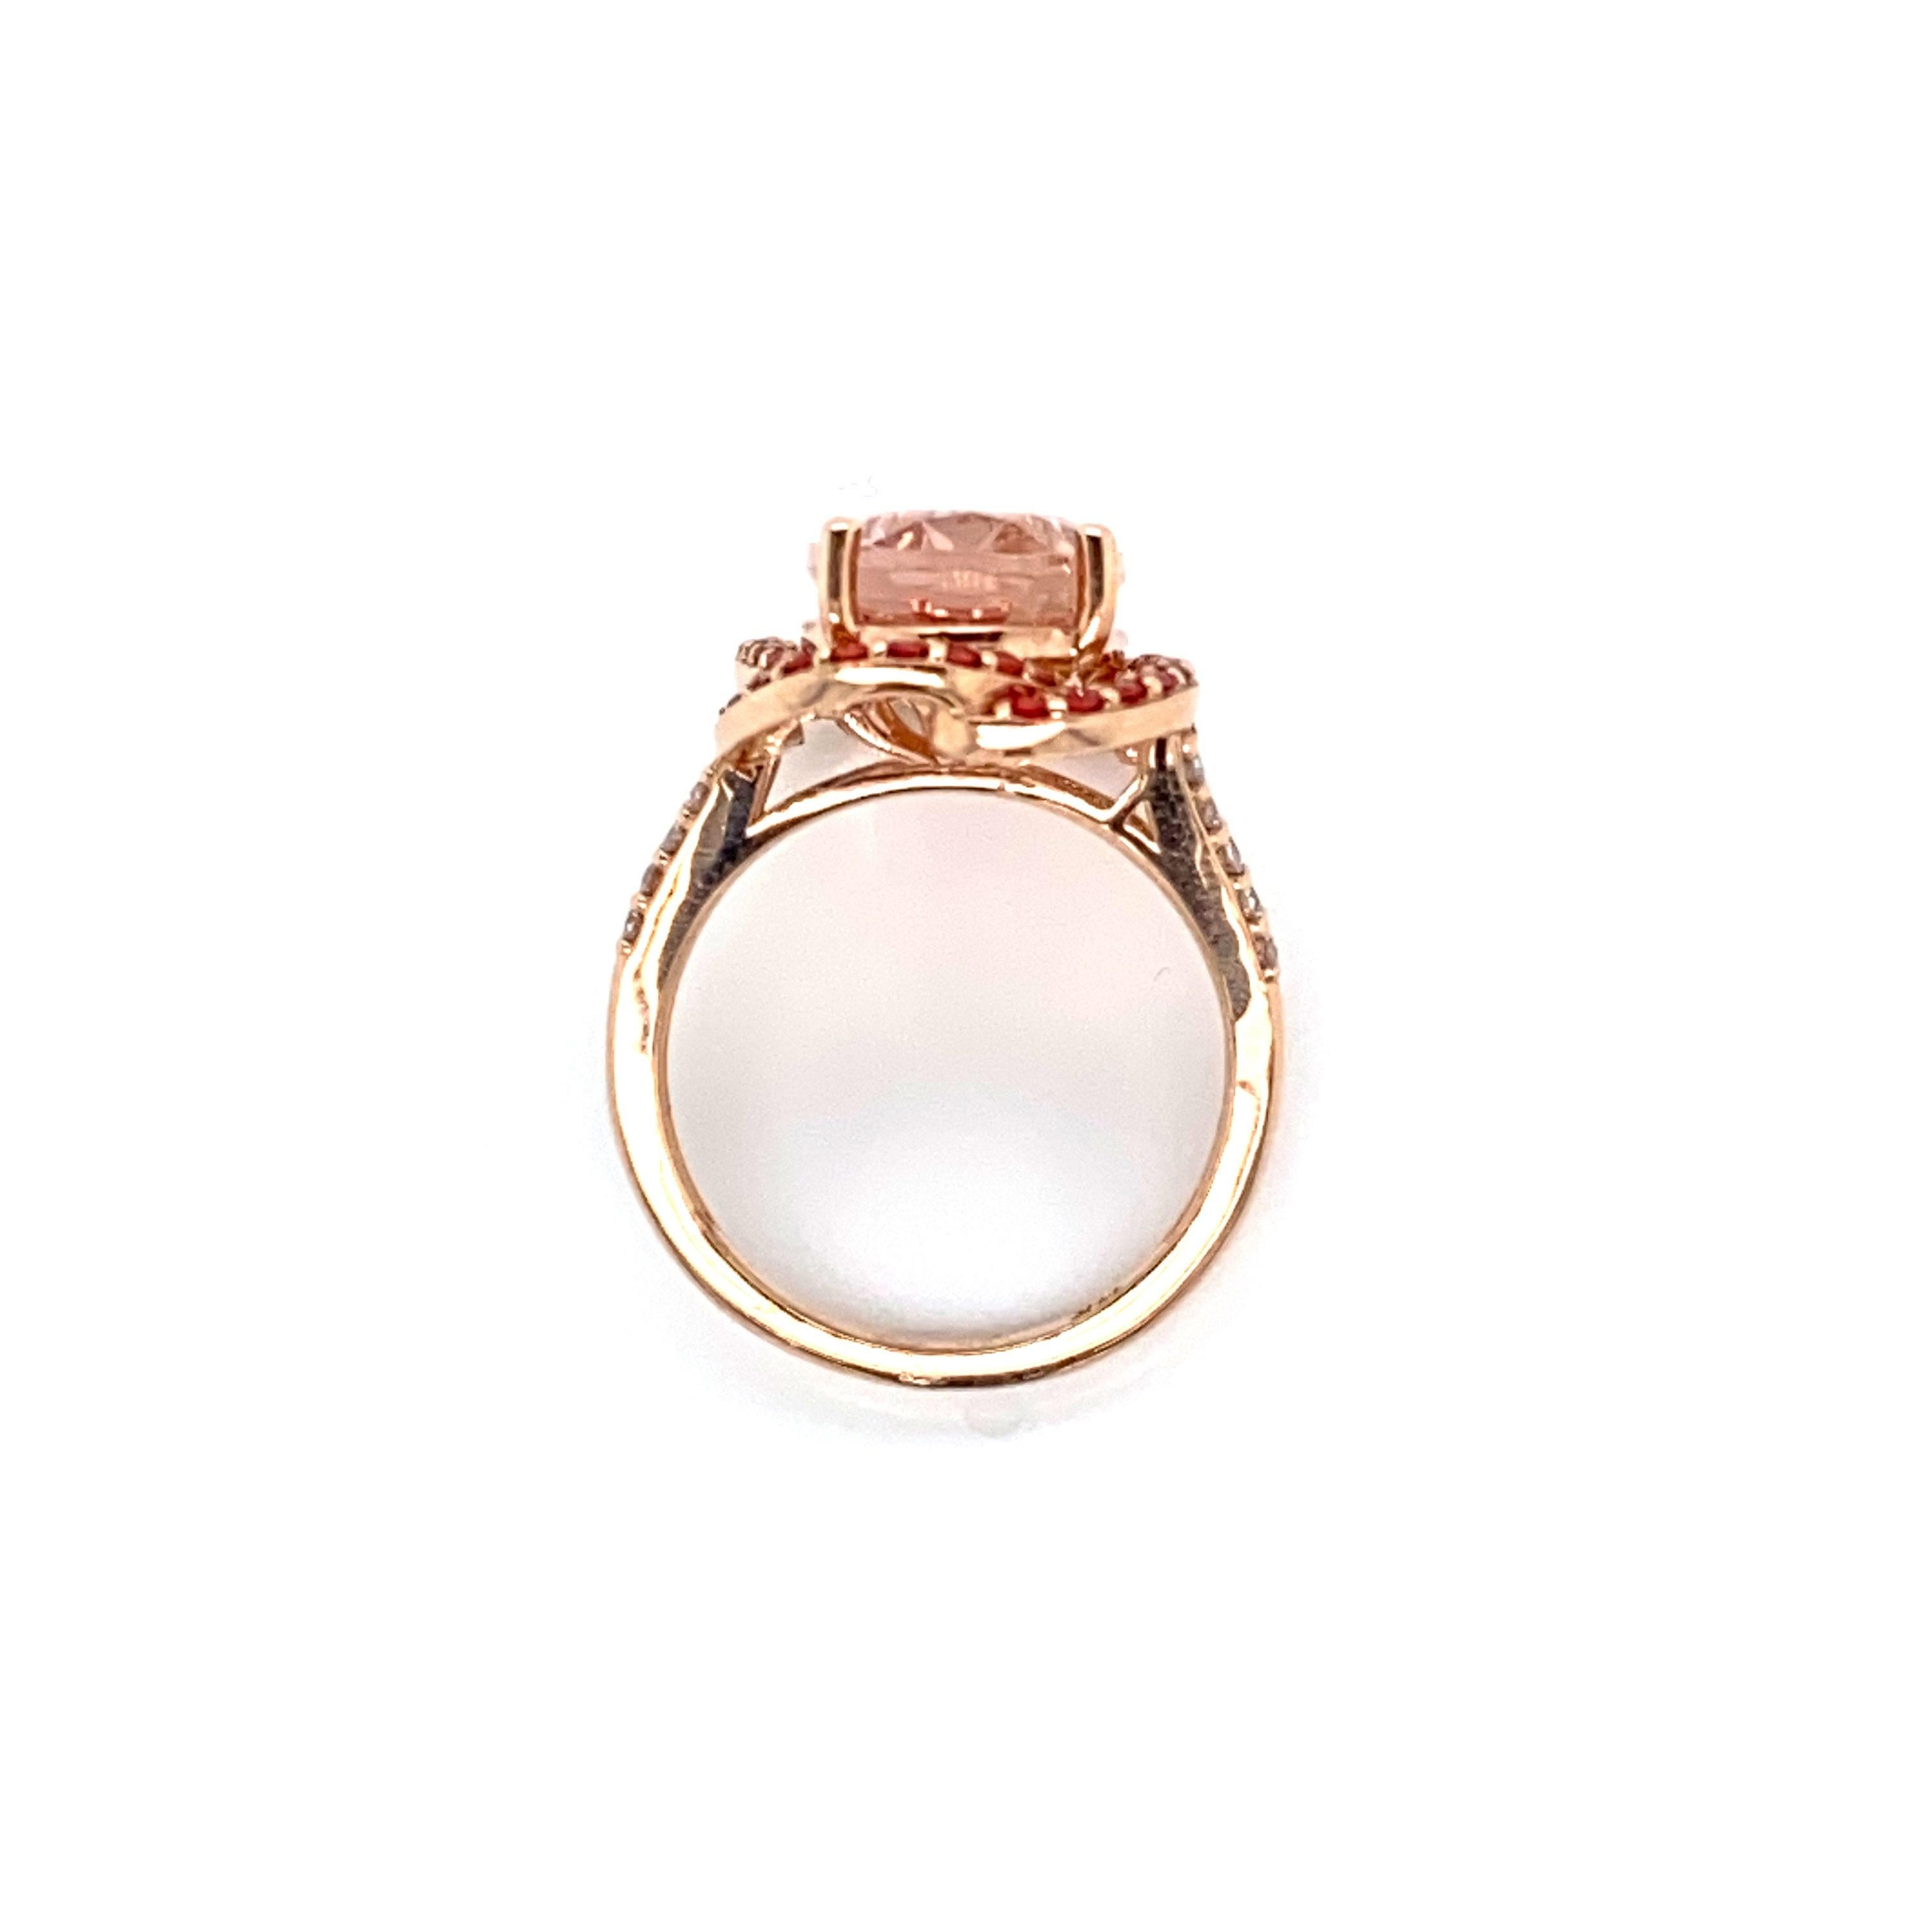 This is a magnificent natural 5.77CT morganite and diamond ring set in solid 14K rose gold. The natural 14x10MM Morganite oval has an excellent peachy pink color and is set on top of a gorgeous diamond encrusted shank. The ring is stamped 14K and is